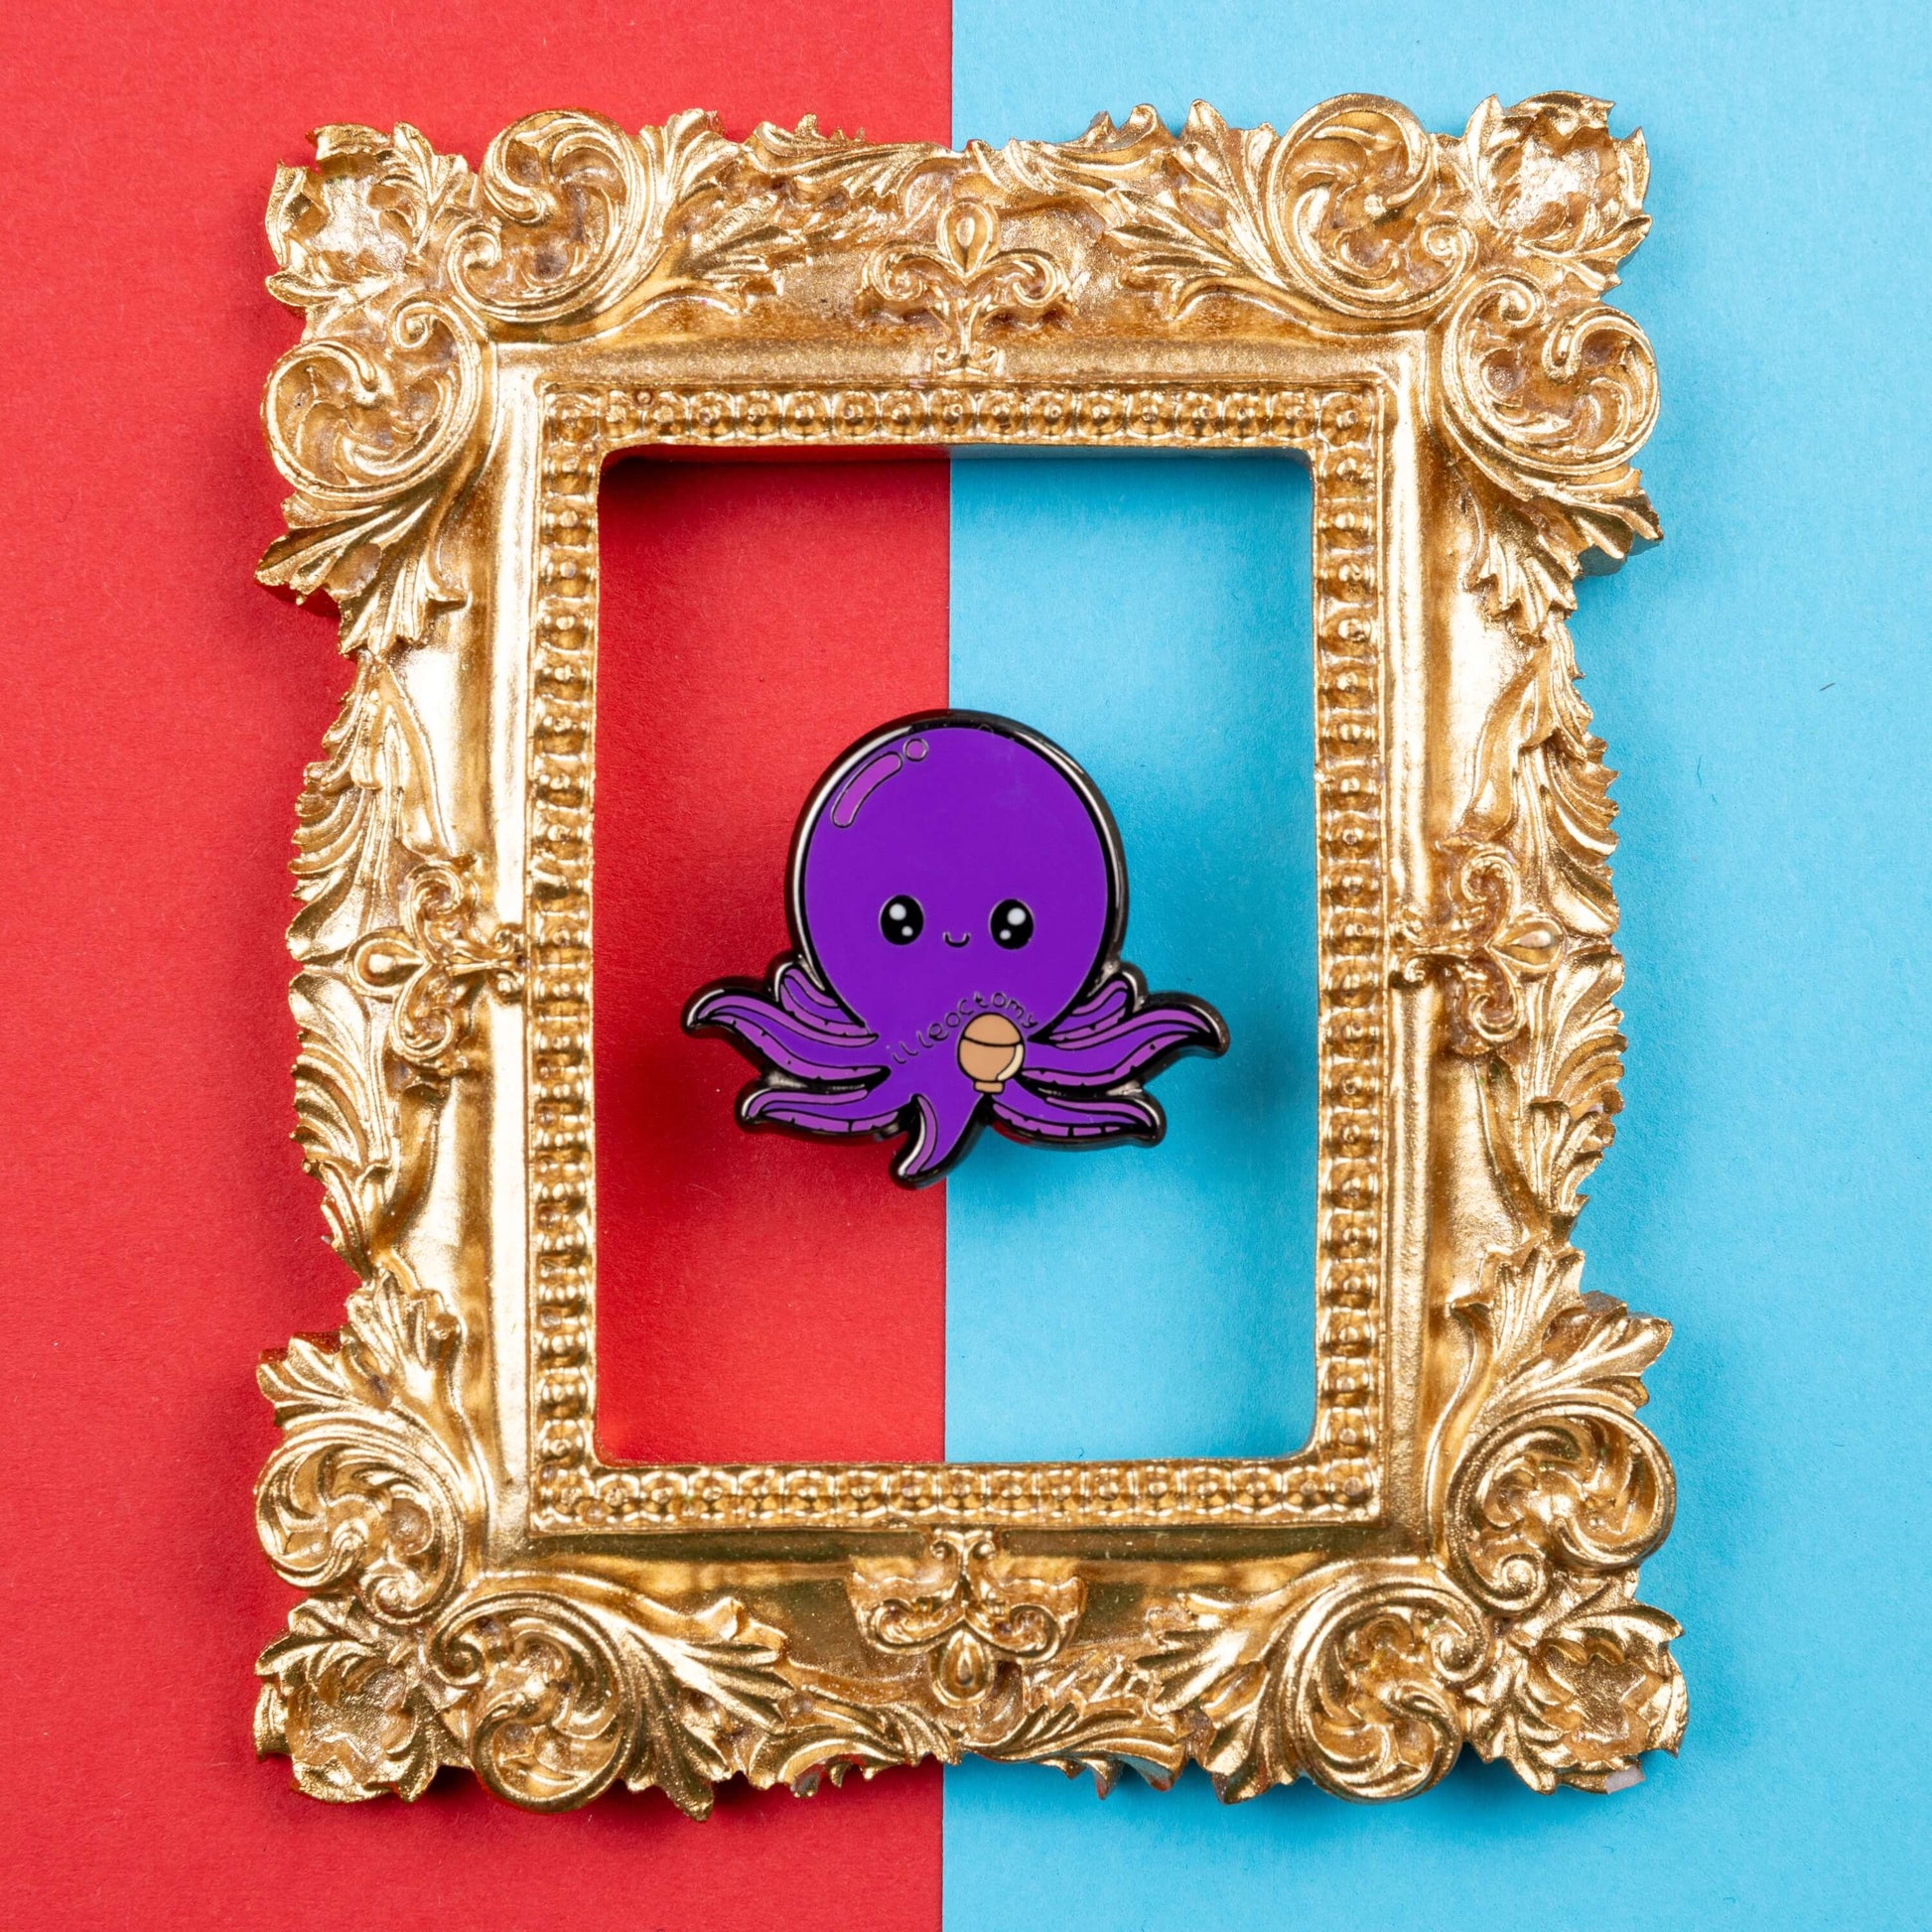 Ileoctomy Enamel Pin - Ileostomy on a blue and red card background inside a gold ornate frame. The enamel pin is a cute smiling purple octopus sticker with text saying ileoctomy on its belly with a stoma bag underneath. Enamel pin designed to raise awareness for Ileostomy.